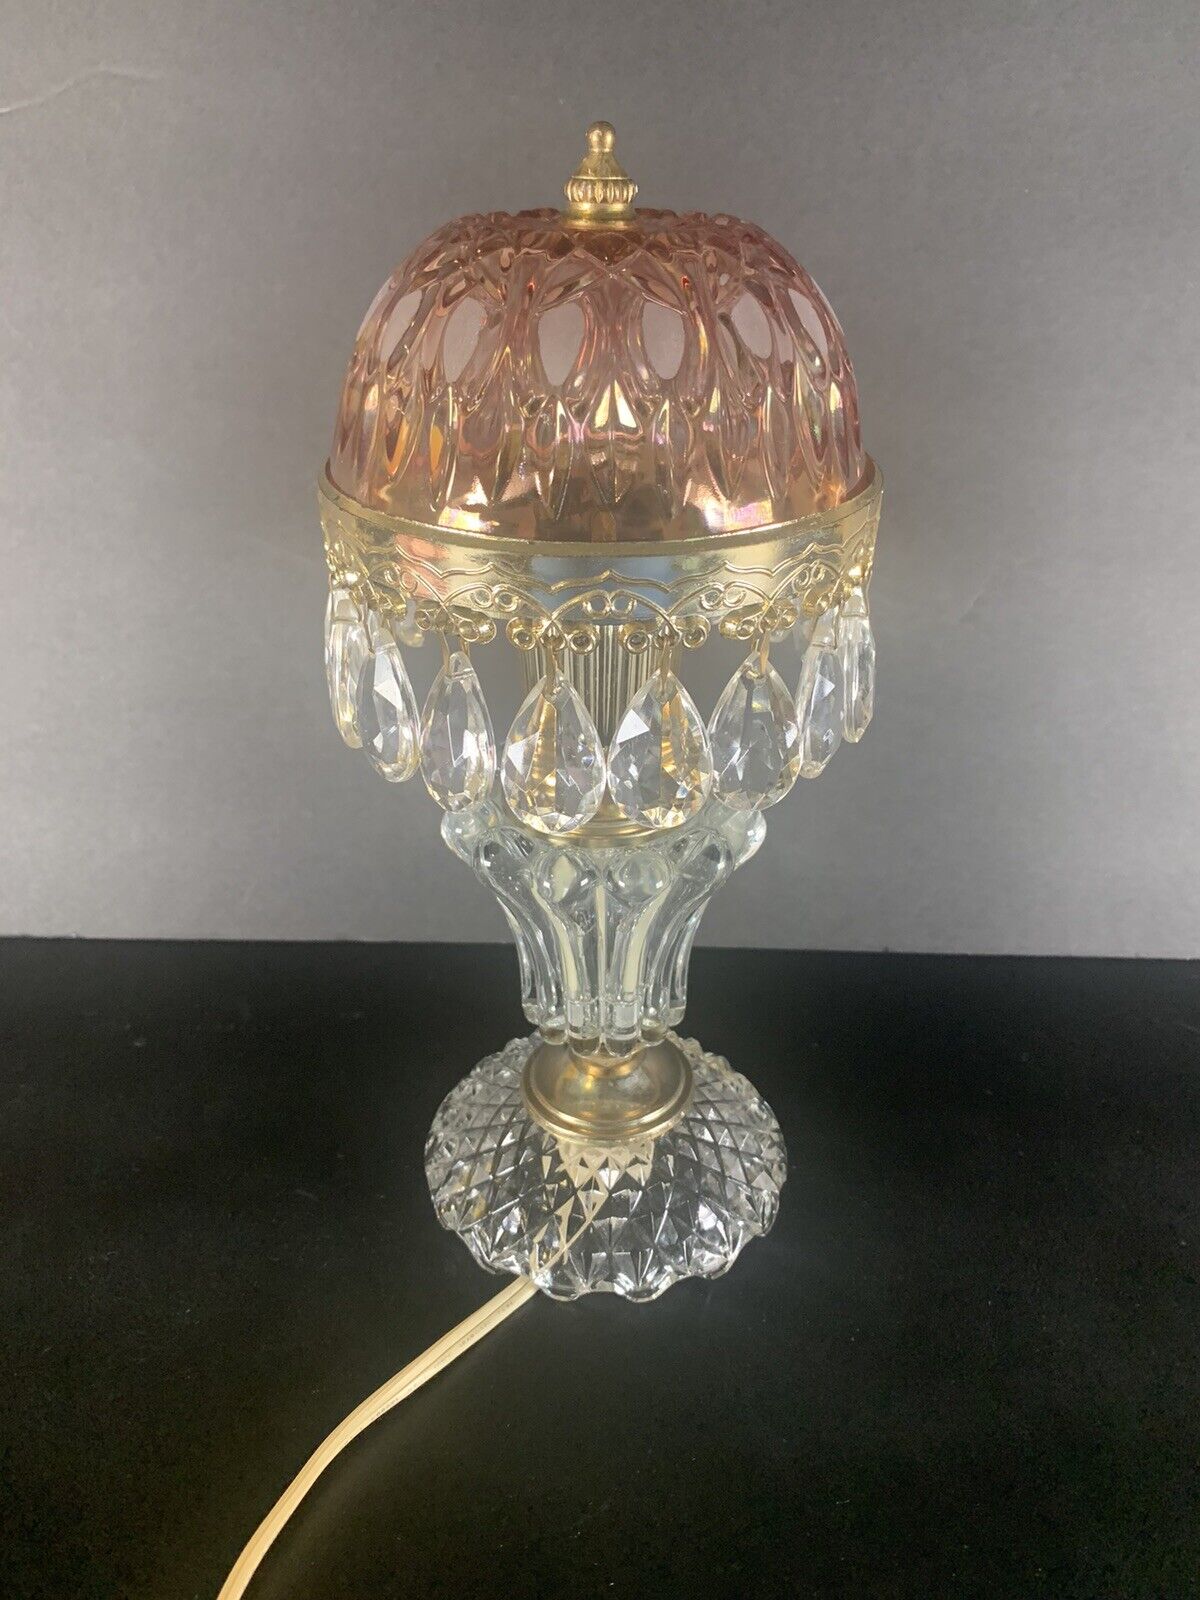 Vintage Michelotti style Boudoir Lamp with Pink Glass Shade & Clear Prisms